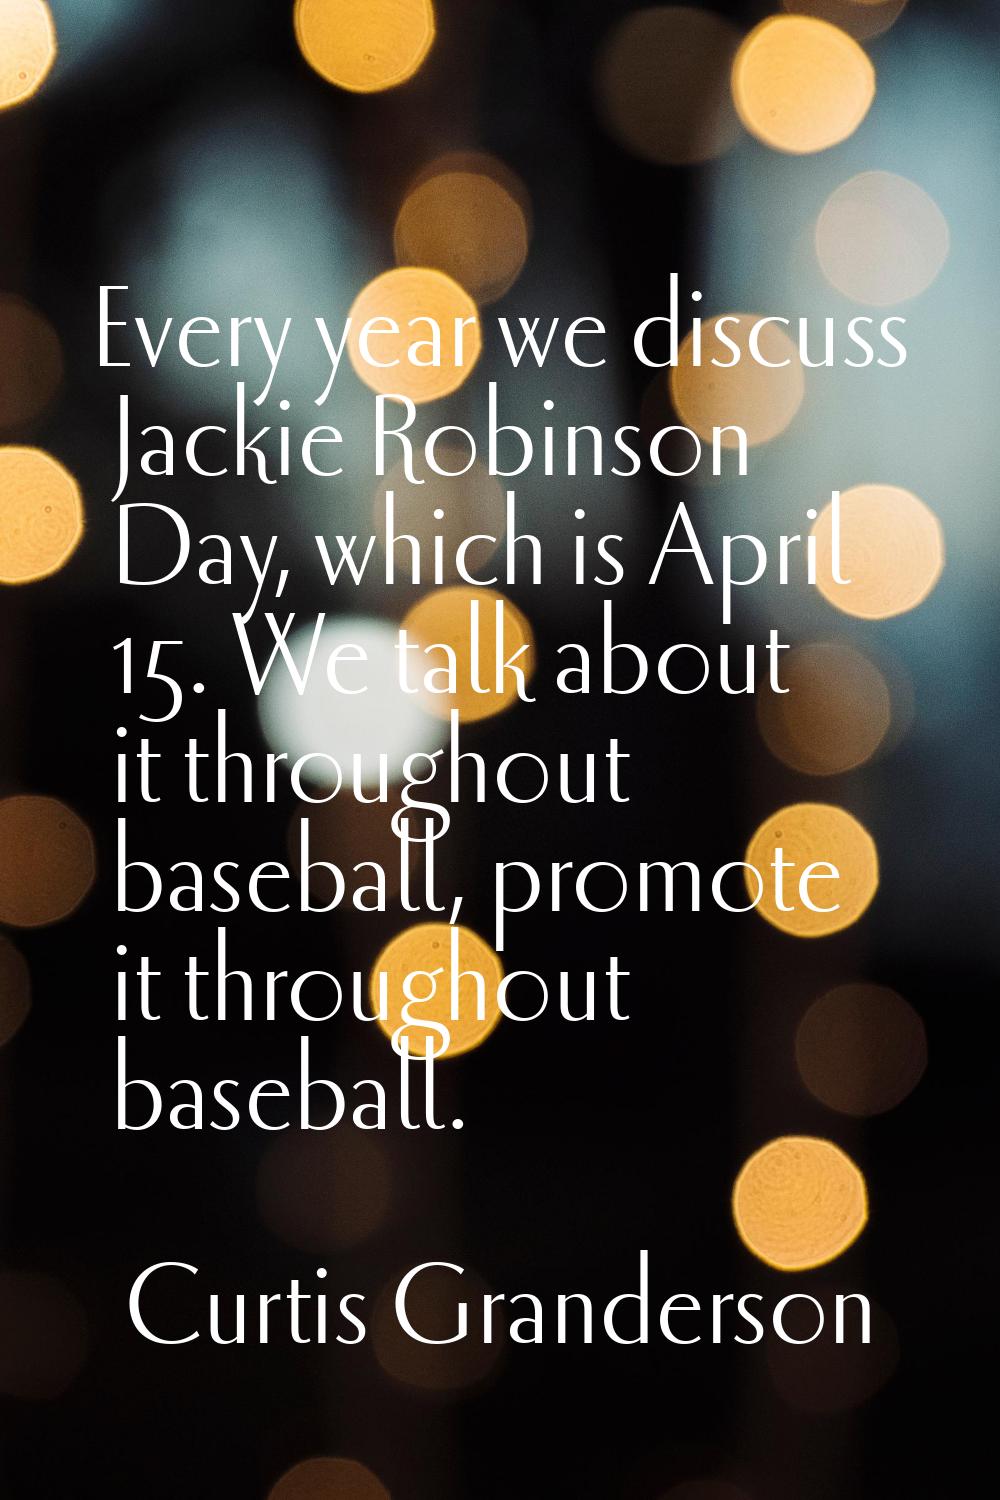 Every year we discuss Jackie Robinson Day, which is April 15. We talk about it throughout baseball,